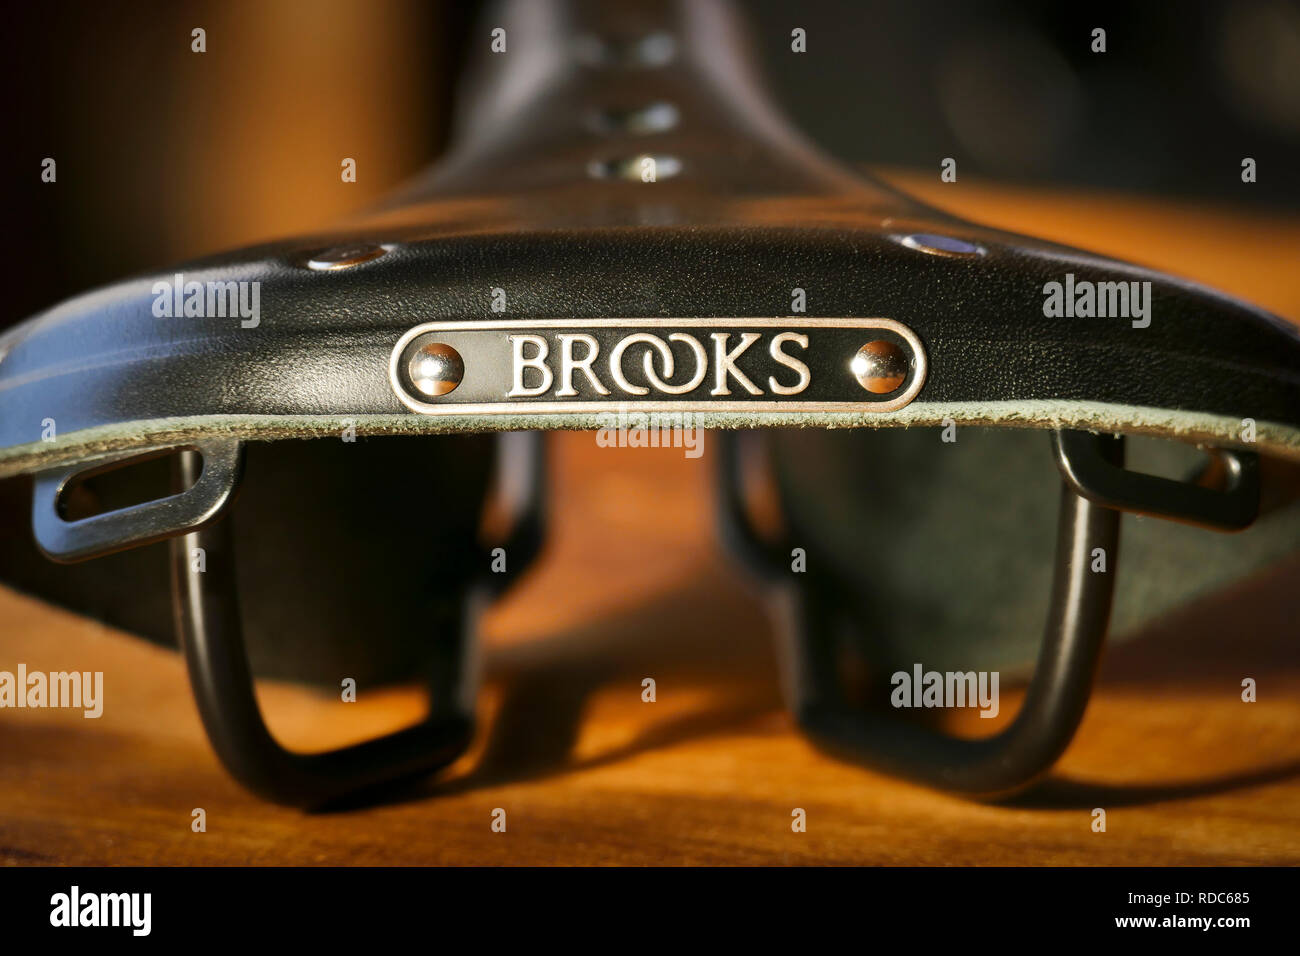 Brooks B17 standard black leather bicycle saddle on wooden table, rear view Stock Photo